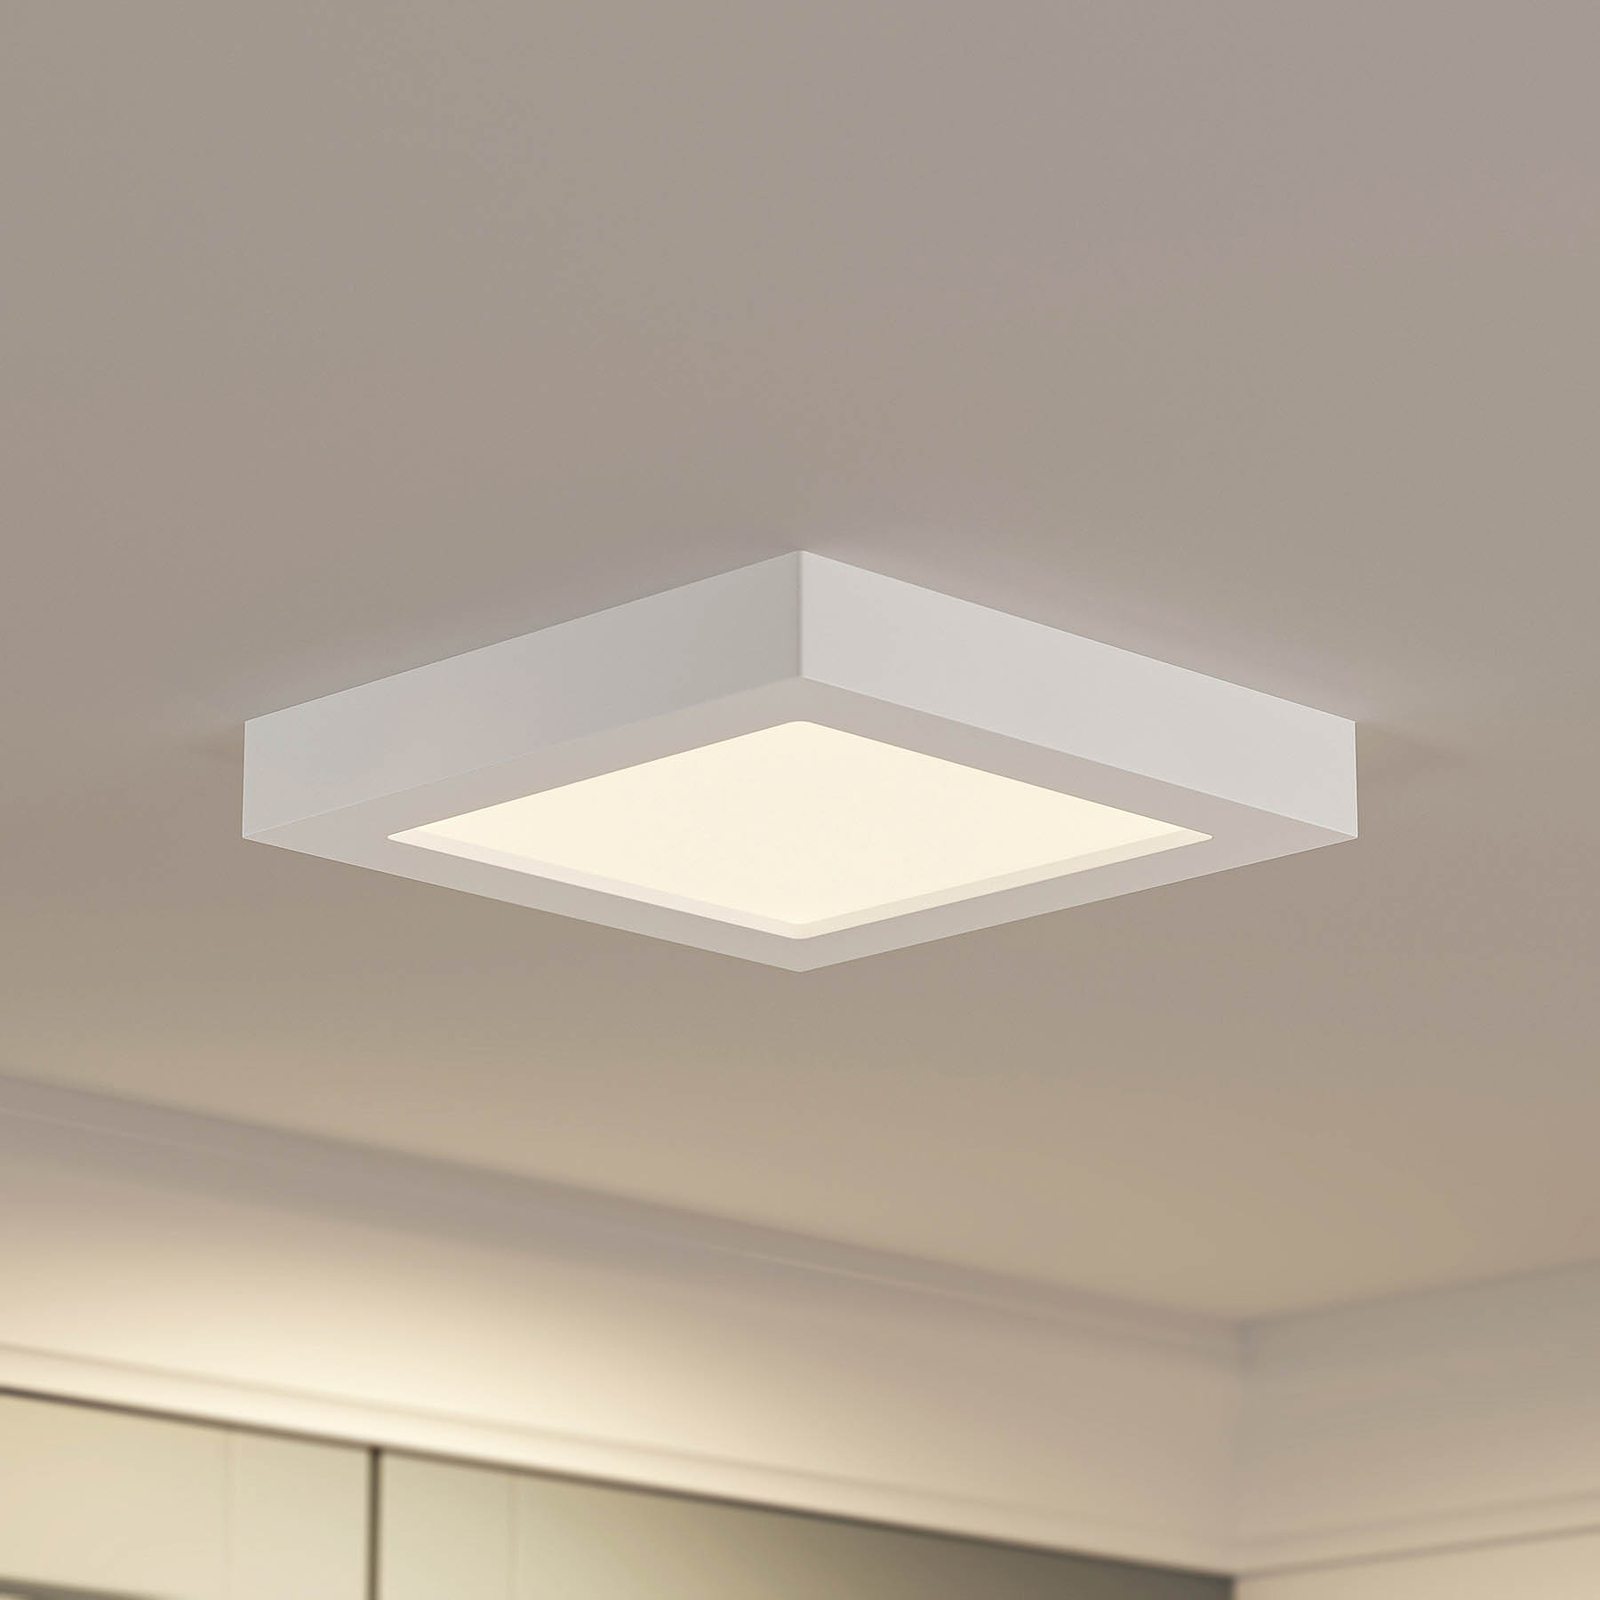 Prios LED ceiling light Alette, white, 22.7 cm, 18W, dimmable